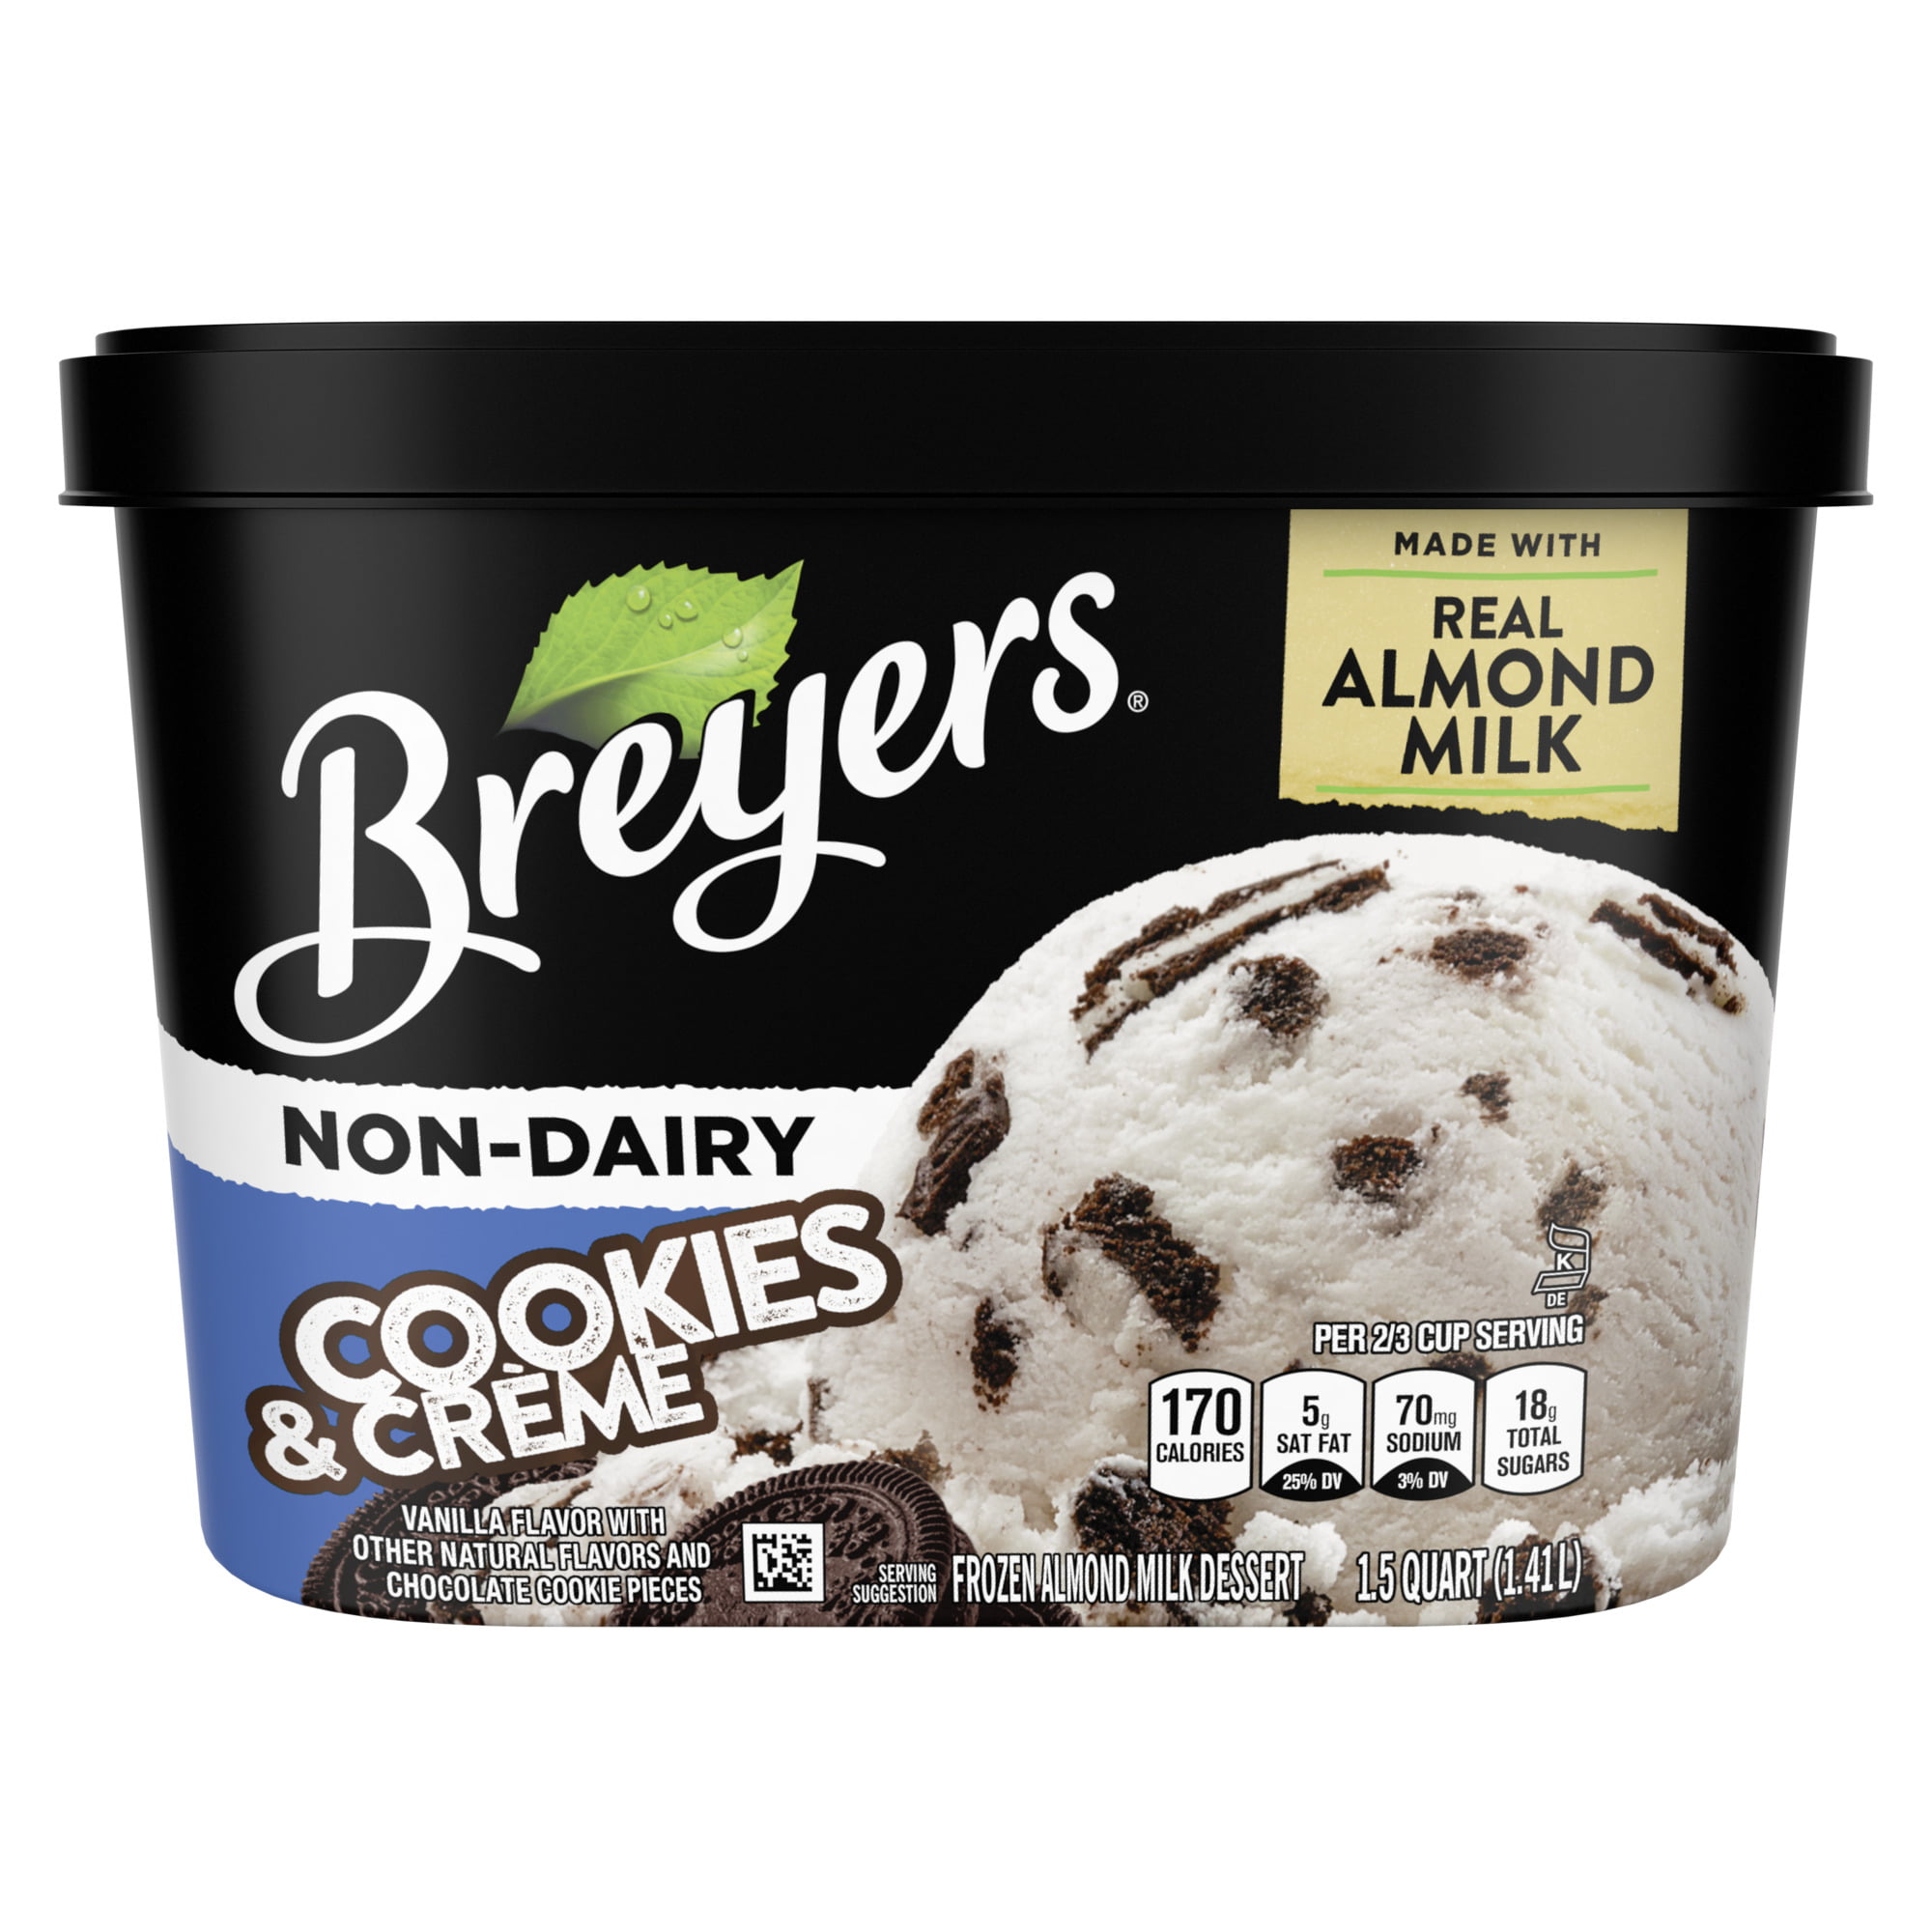 Breyers Non-Dairy Cookies and Creme Frozen Dessert, 48 oz - image 1 of 9